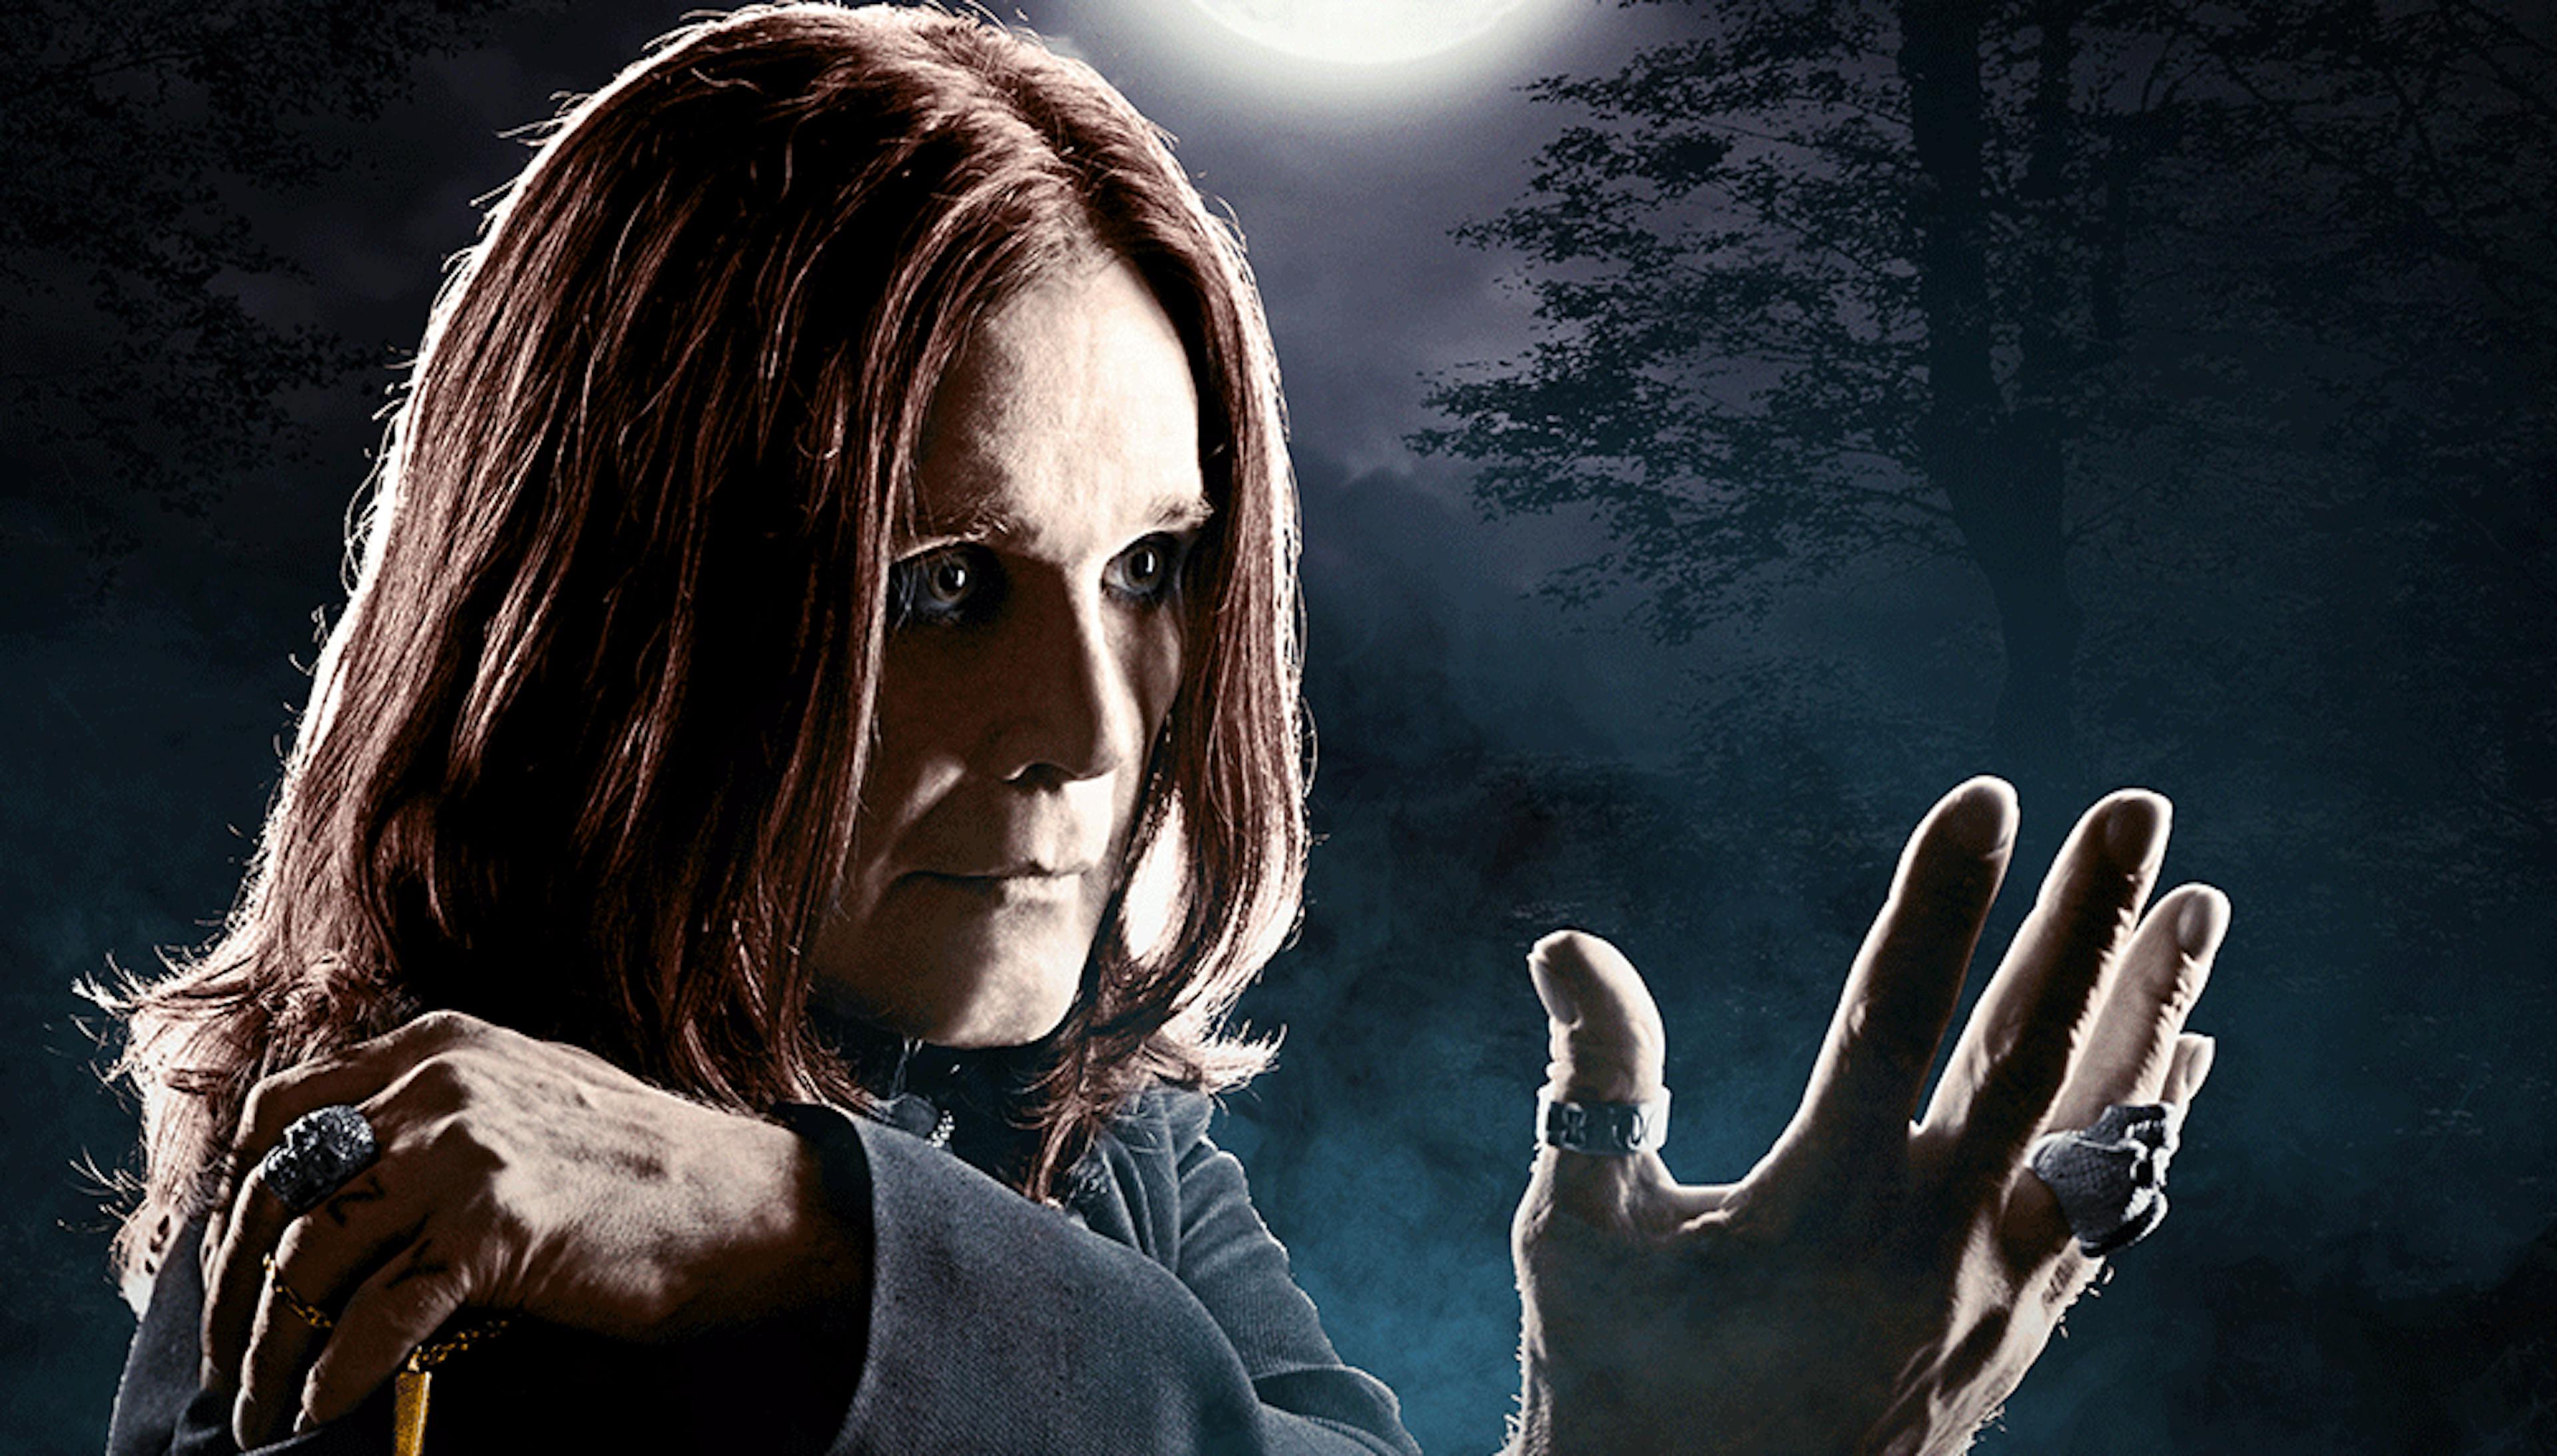 Sharon Osbourne: "Ozzy Can’t Wait To Get The Green Light From Doctor To Tour Again"